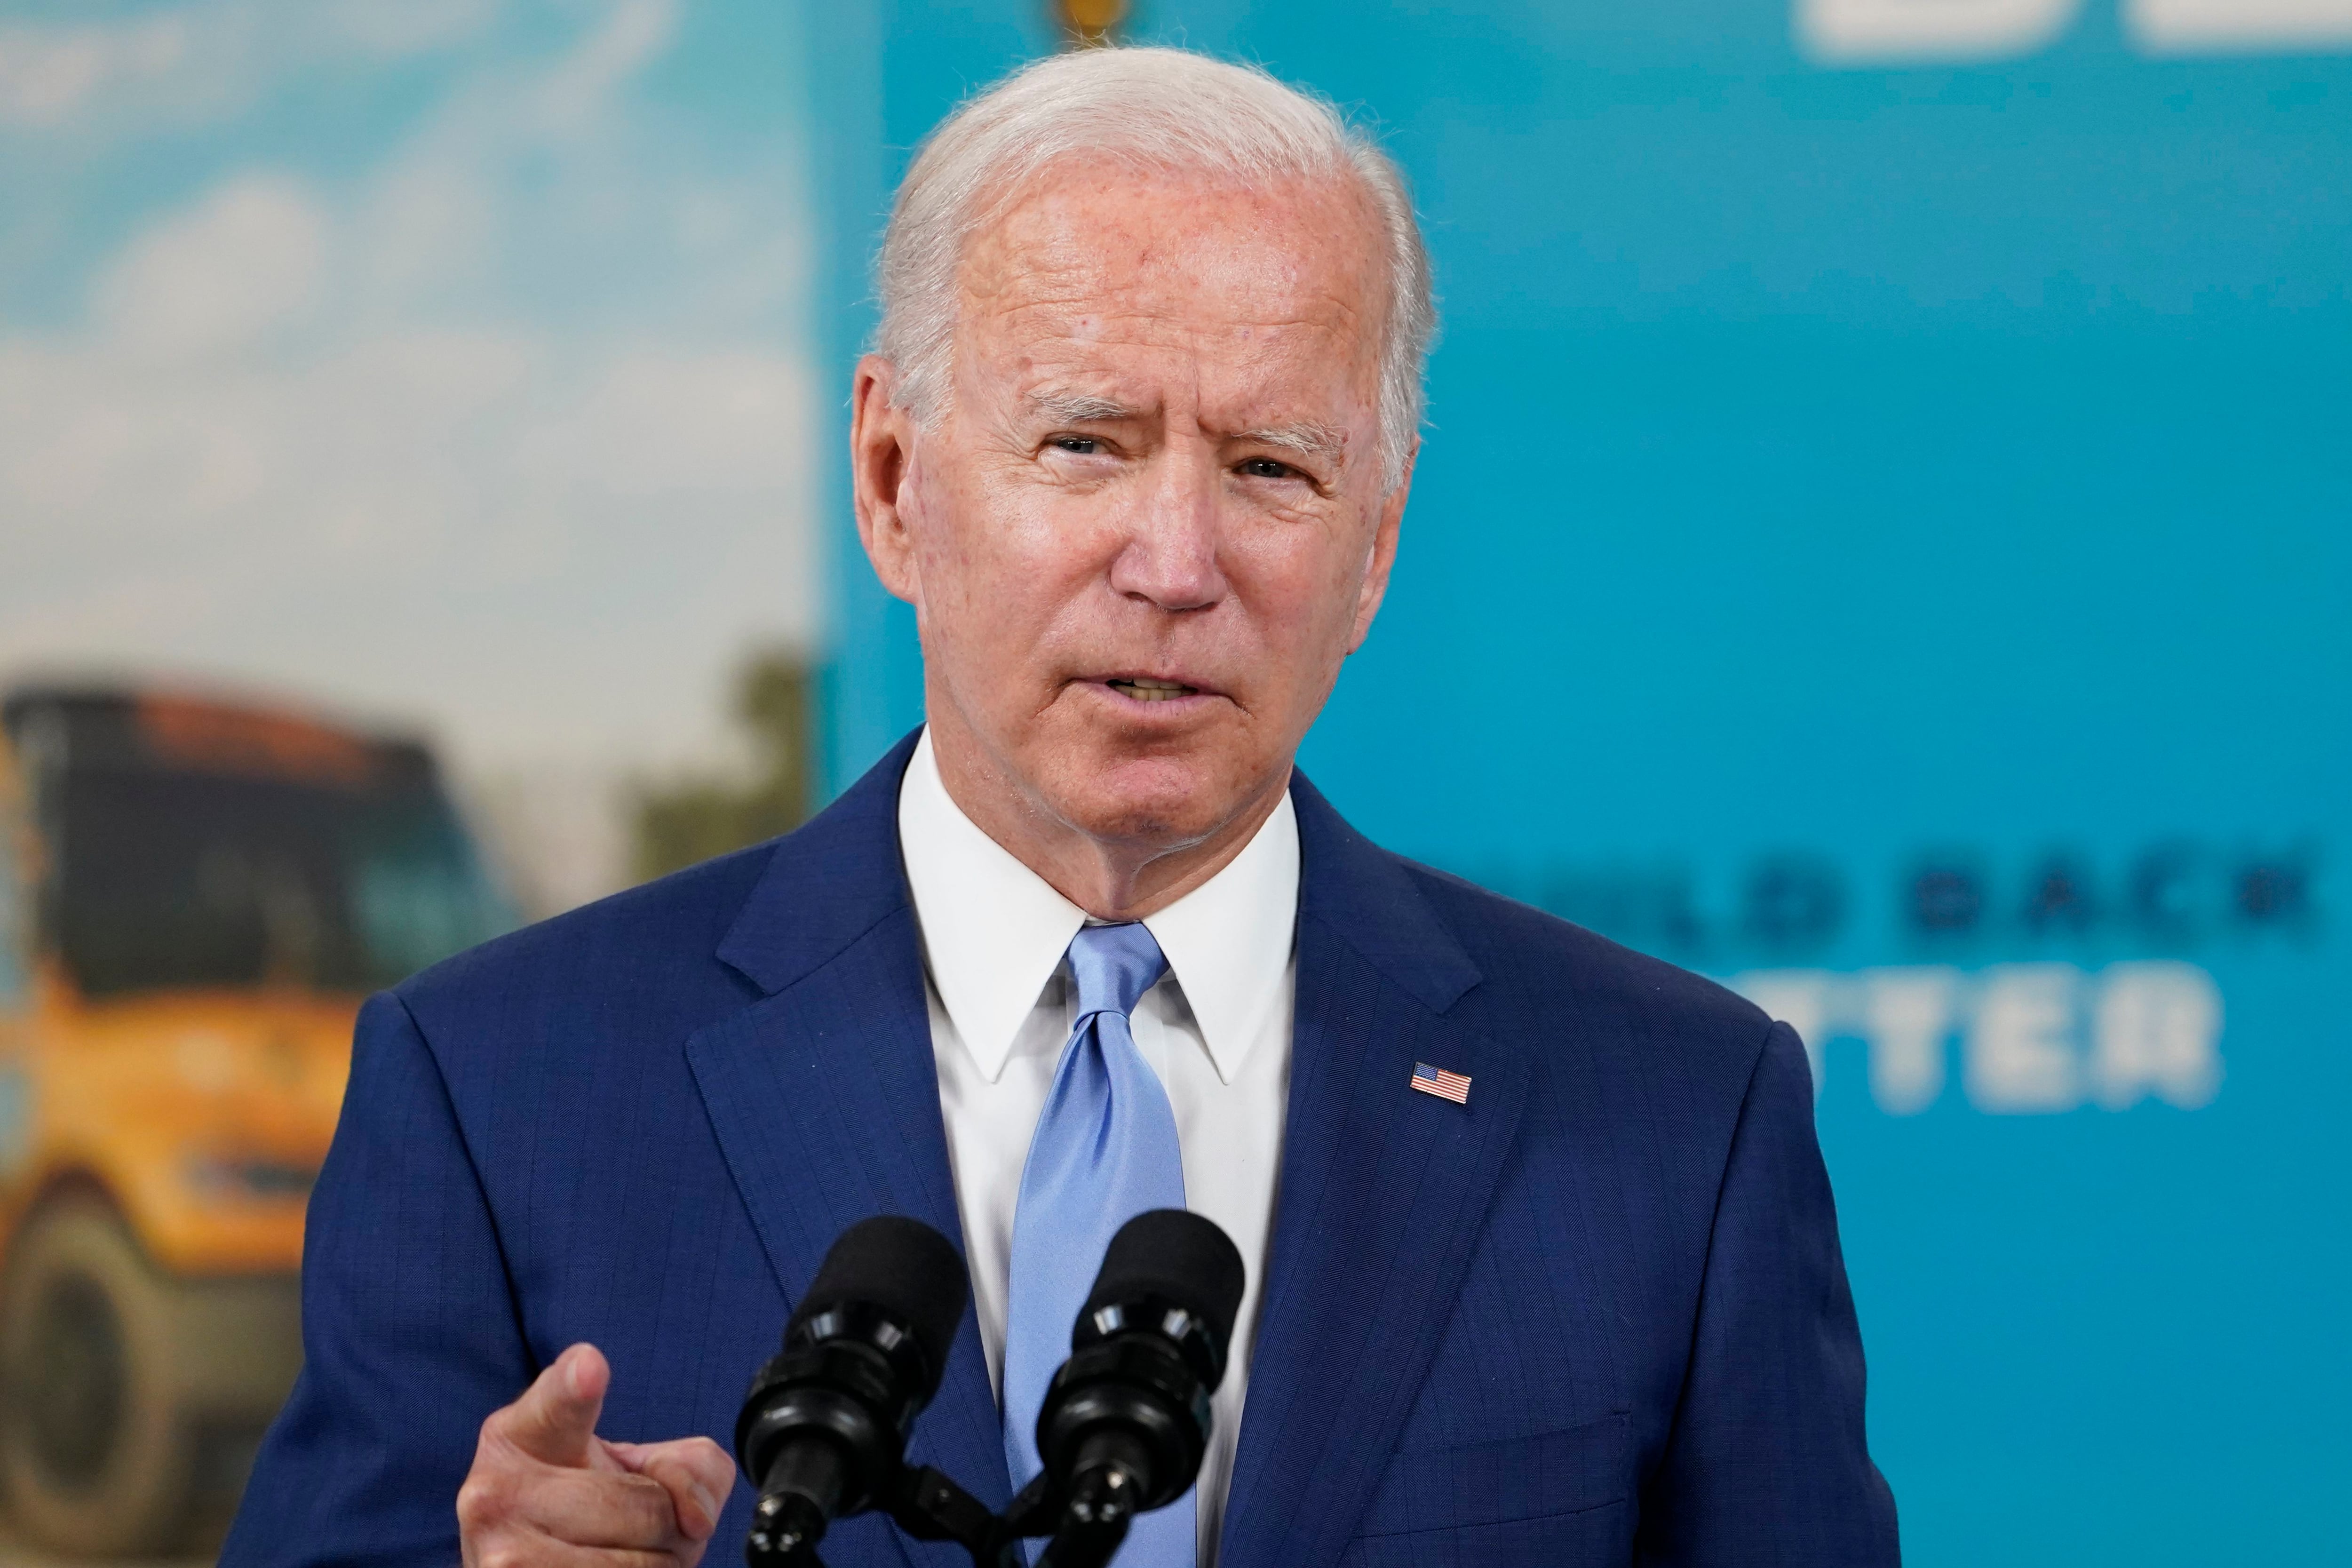 Biden attends nephew’s wedding to ex-‘Real Housewives’ star